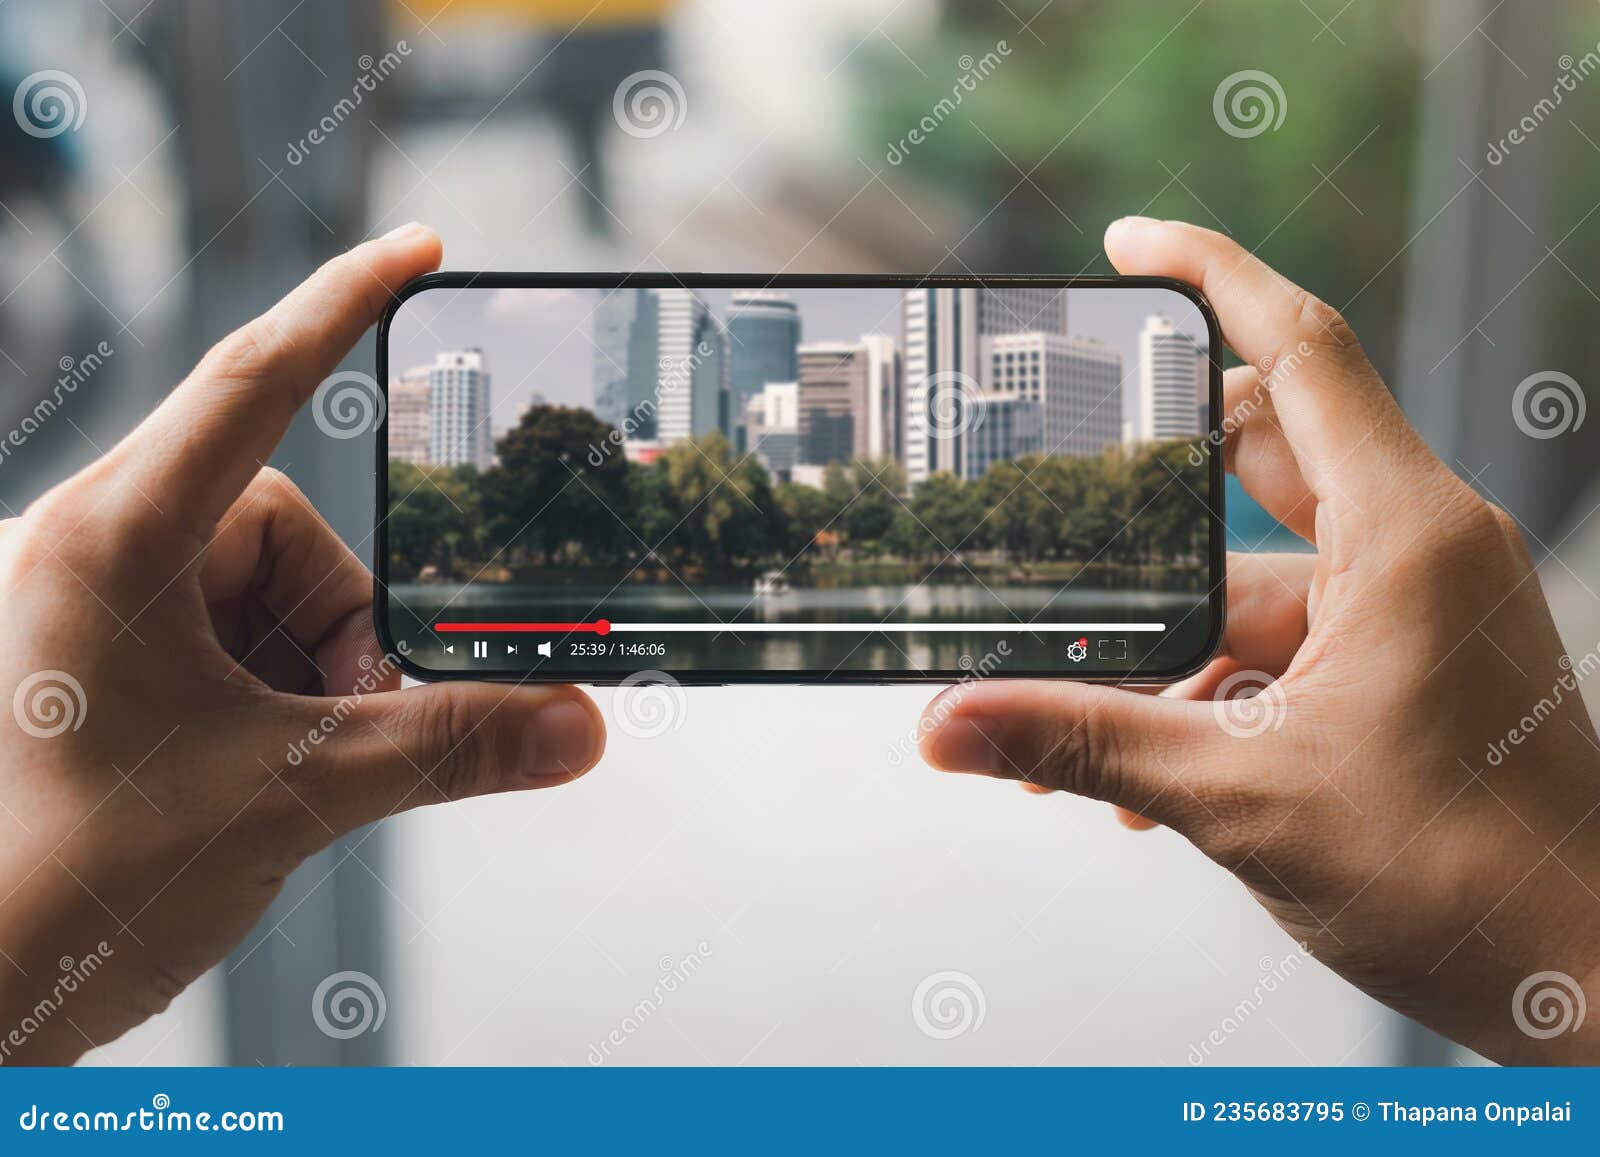 Online Movie Streaming with Smartphone Stock Image